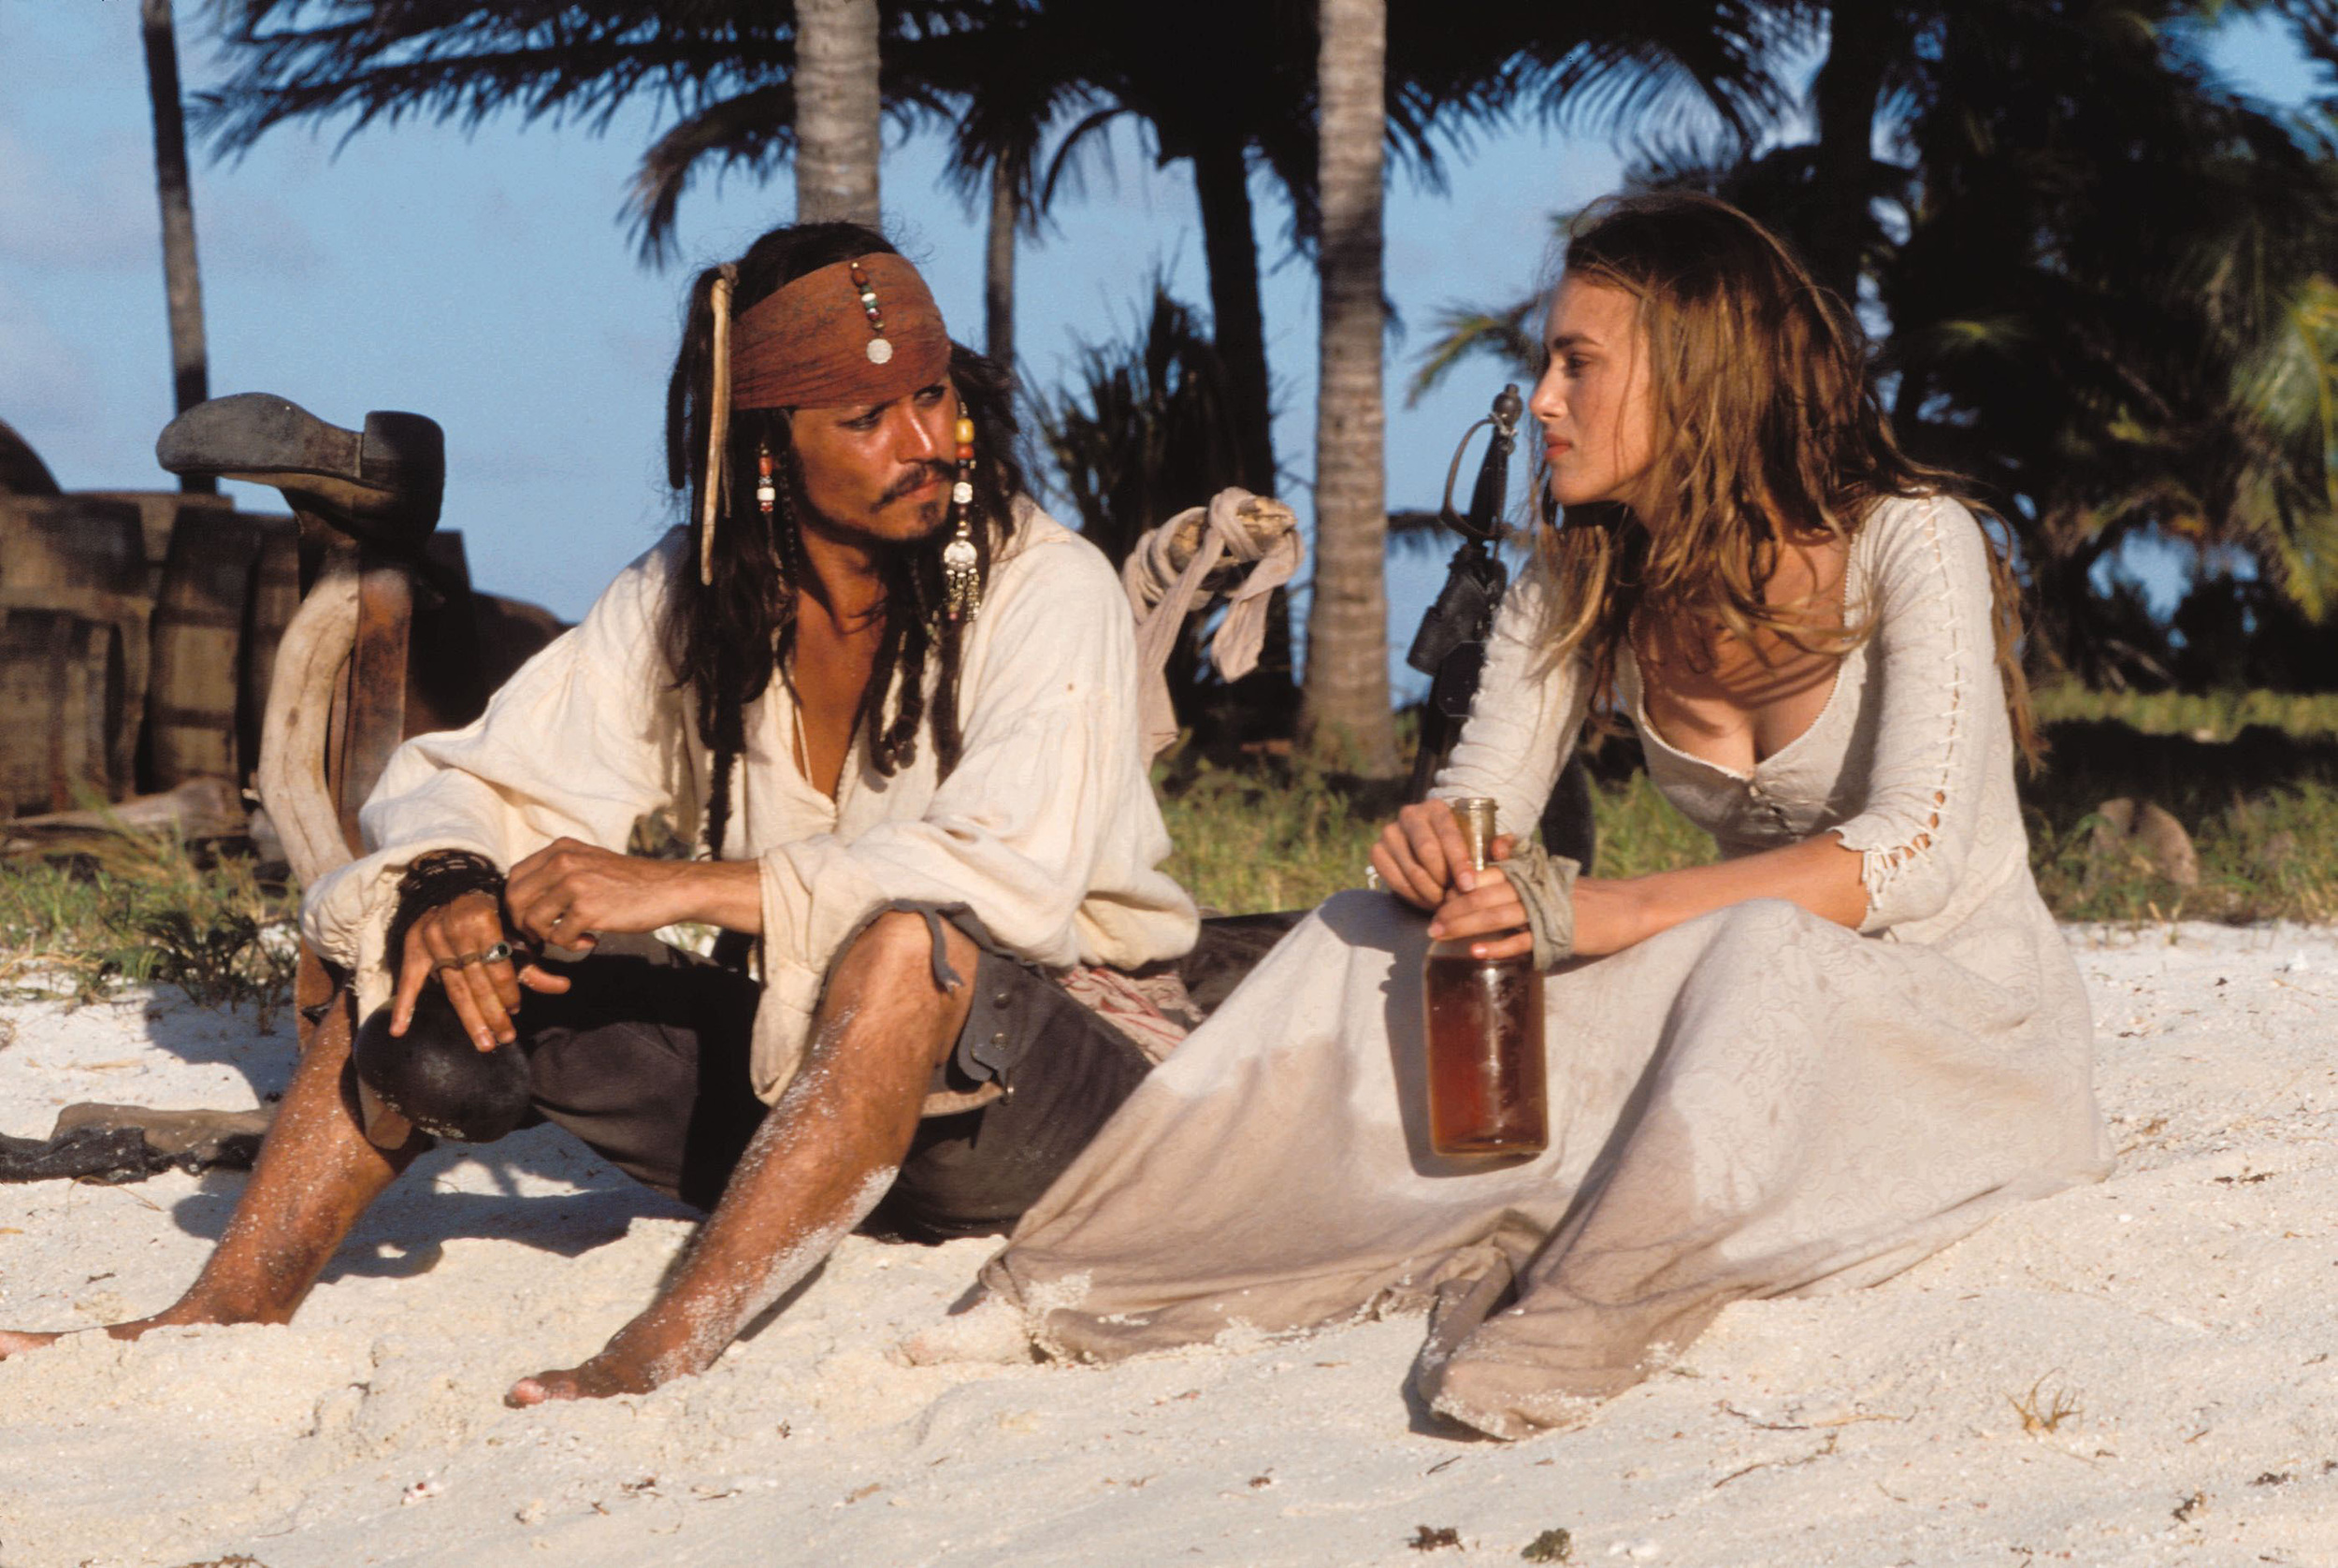 <p>All those fears of another flop of a pirate movie? They proved unfounded. The film topped the domestic box office when it debuted, and it was huge overseas. In fact, <em>Curse of the Black Pearl</em> was the top movie internationally for seven-straight weeks, tying the record with <em>Men in Black II</em>. All in all, it made $654.3 million worldwide, making it the fourth-highest-grossing film of 2003.</p><p><a href='https://www.msn.com/en-us/community/channel/vid-cj9pqbr0vn9in2b6ddcd8sfgpfq6x6utp44fssrv6mc2gtybw0us'>Follow us on MSN to see more of our exclusive entertainment content.</a></p>